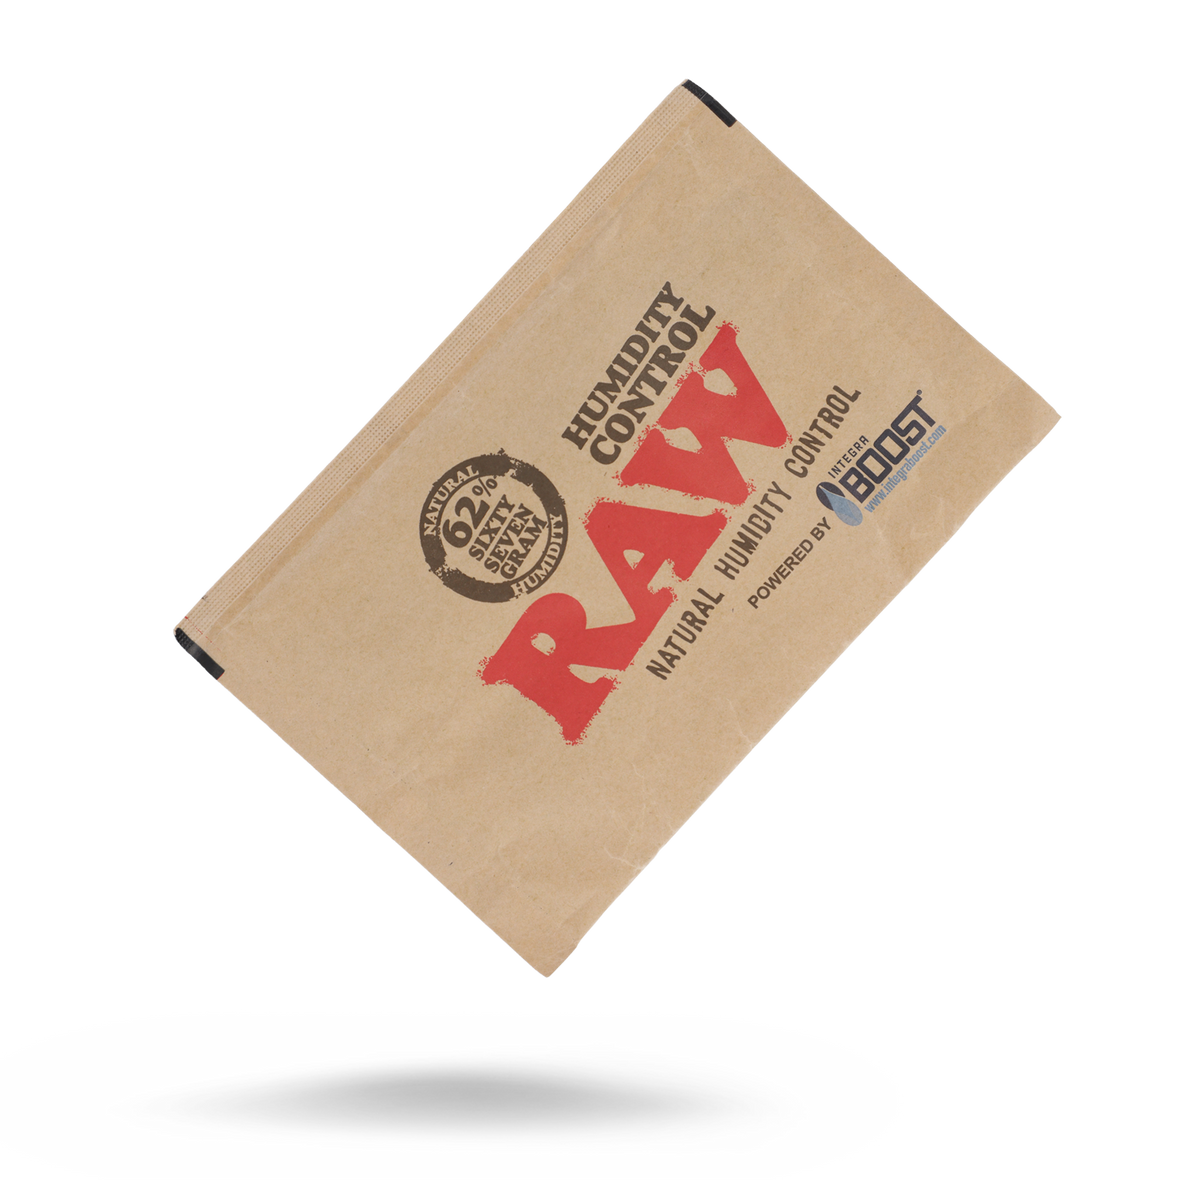 RAW 62% Humidity Control Pack 8-67 gram Accessories WAR00261-1/12 esd-official